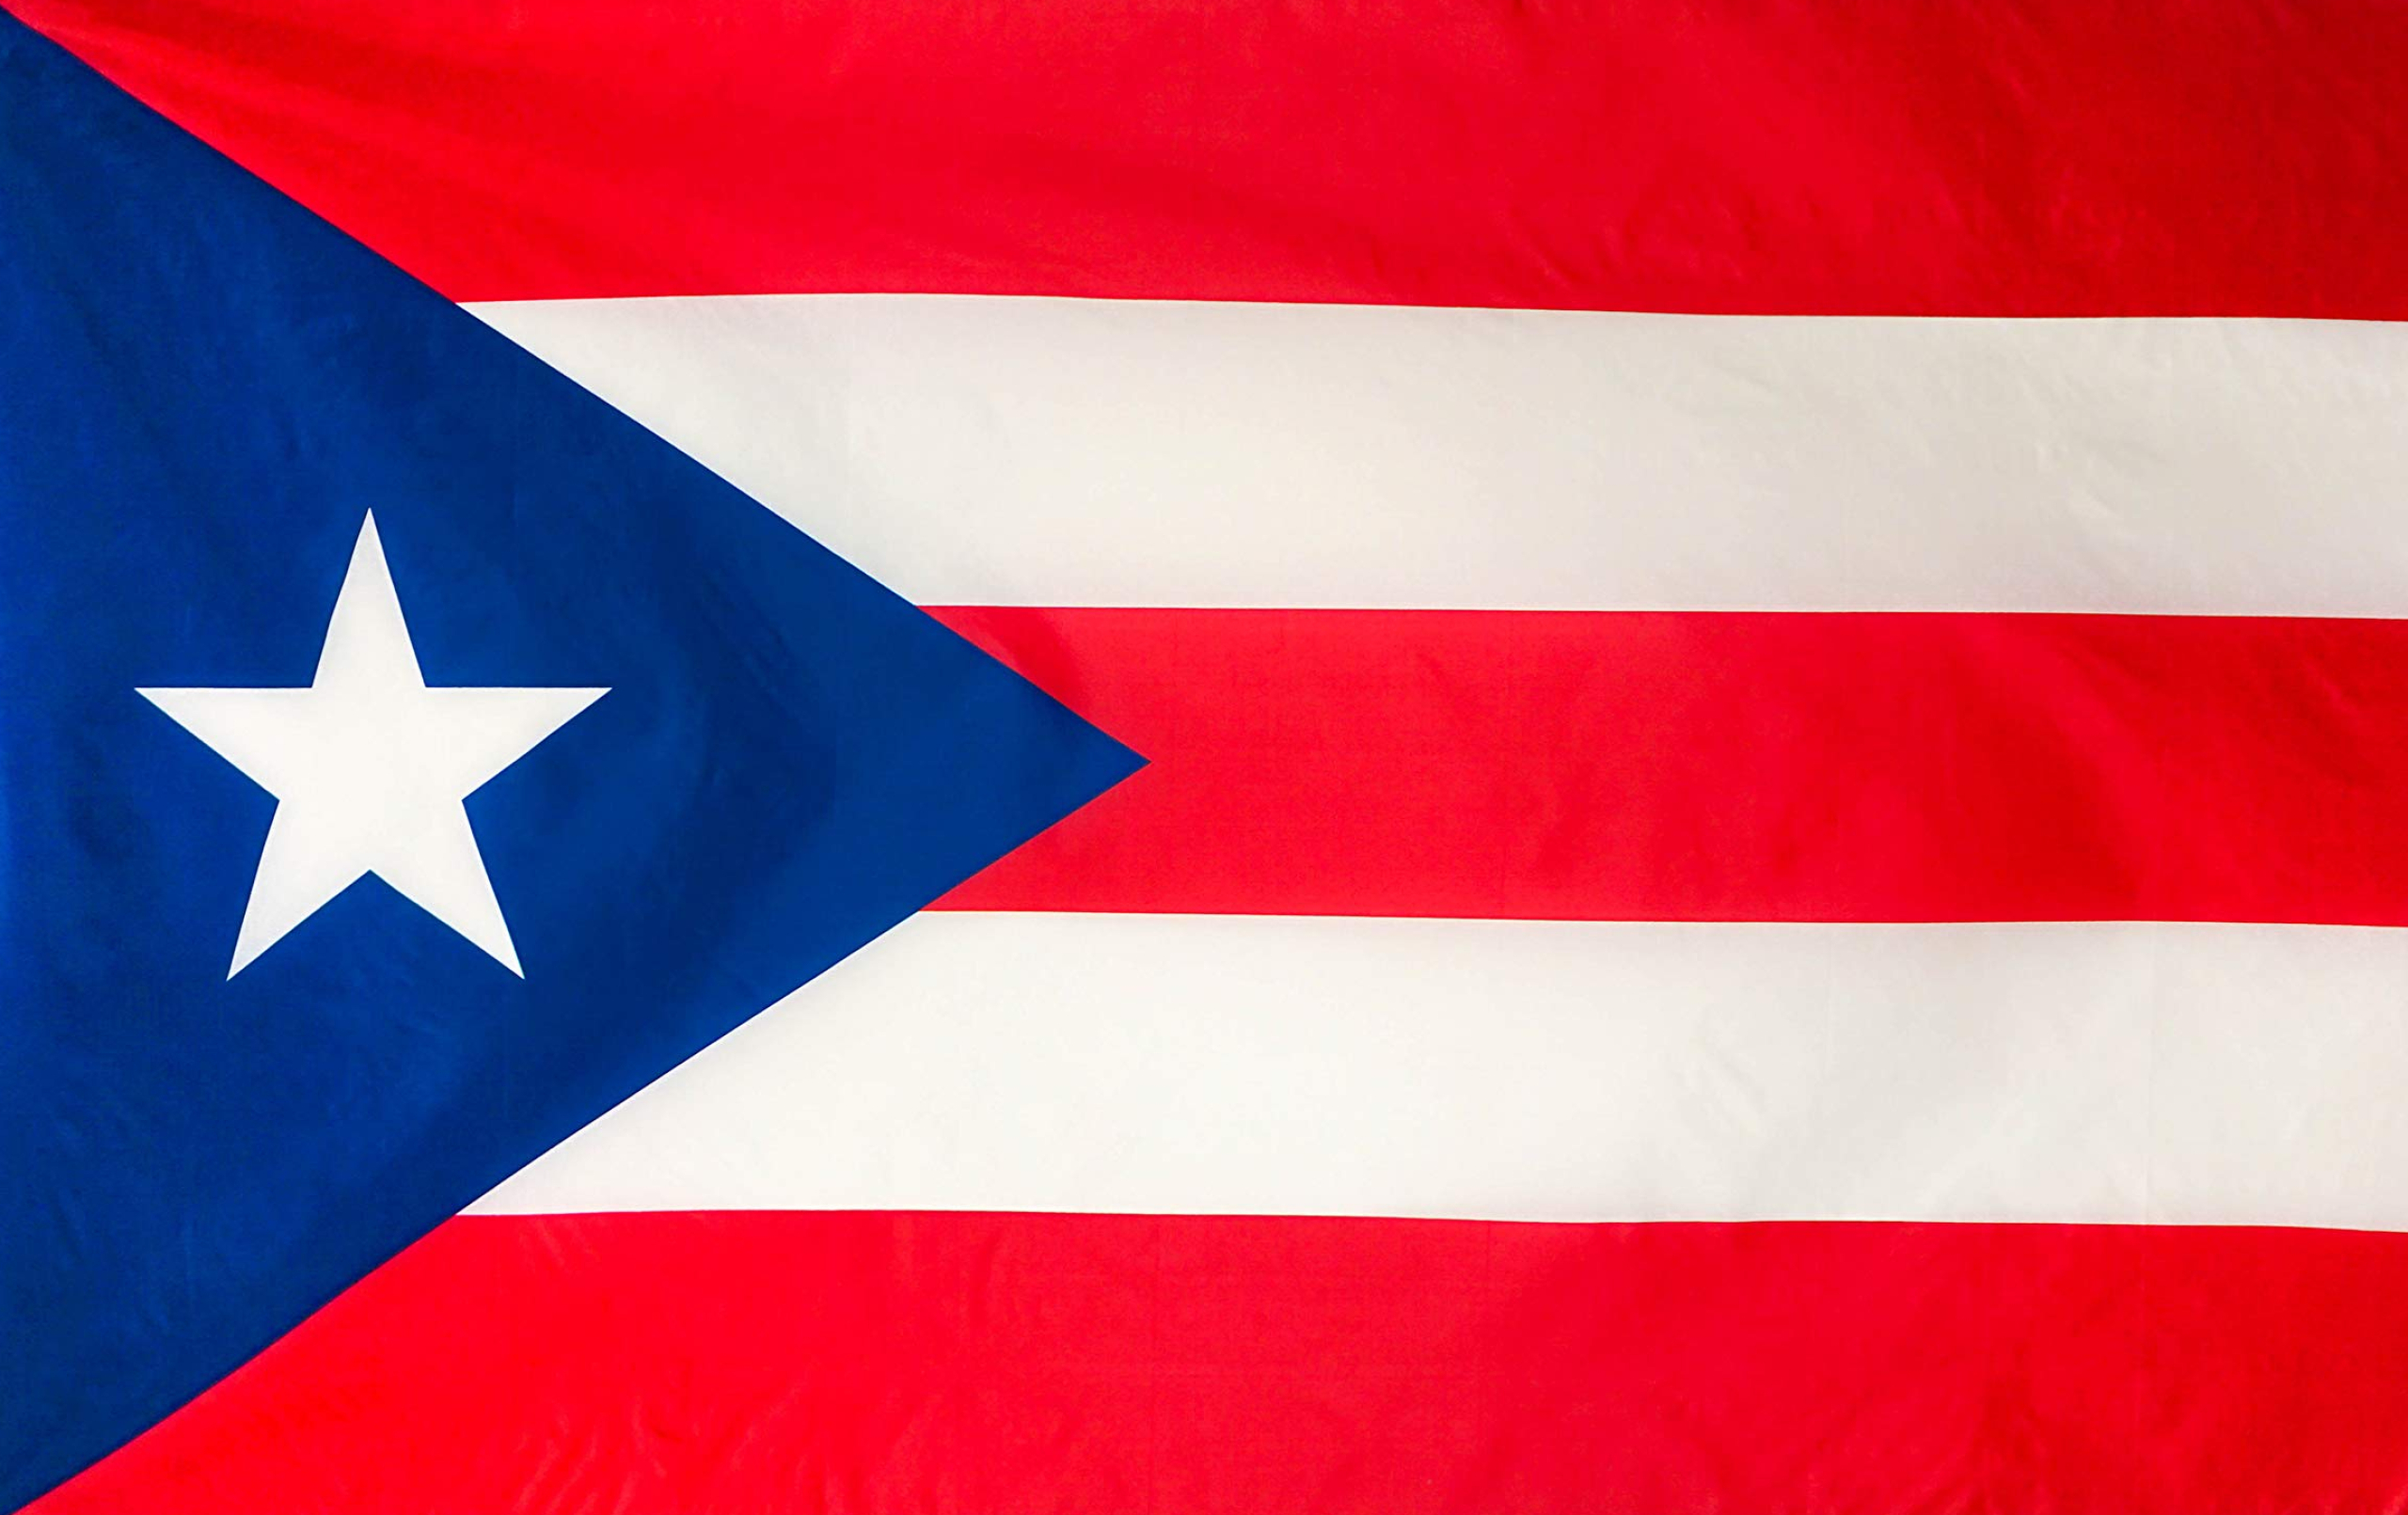 2560x1611 : DANF Puerto Rico Flag 3x5 Foot Polyester Puerto Rican National Flags Polyester with Brass Grommets 3 X 5 Ft : Patio, Lawn \u0026 Garde